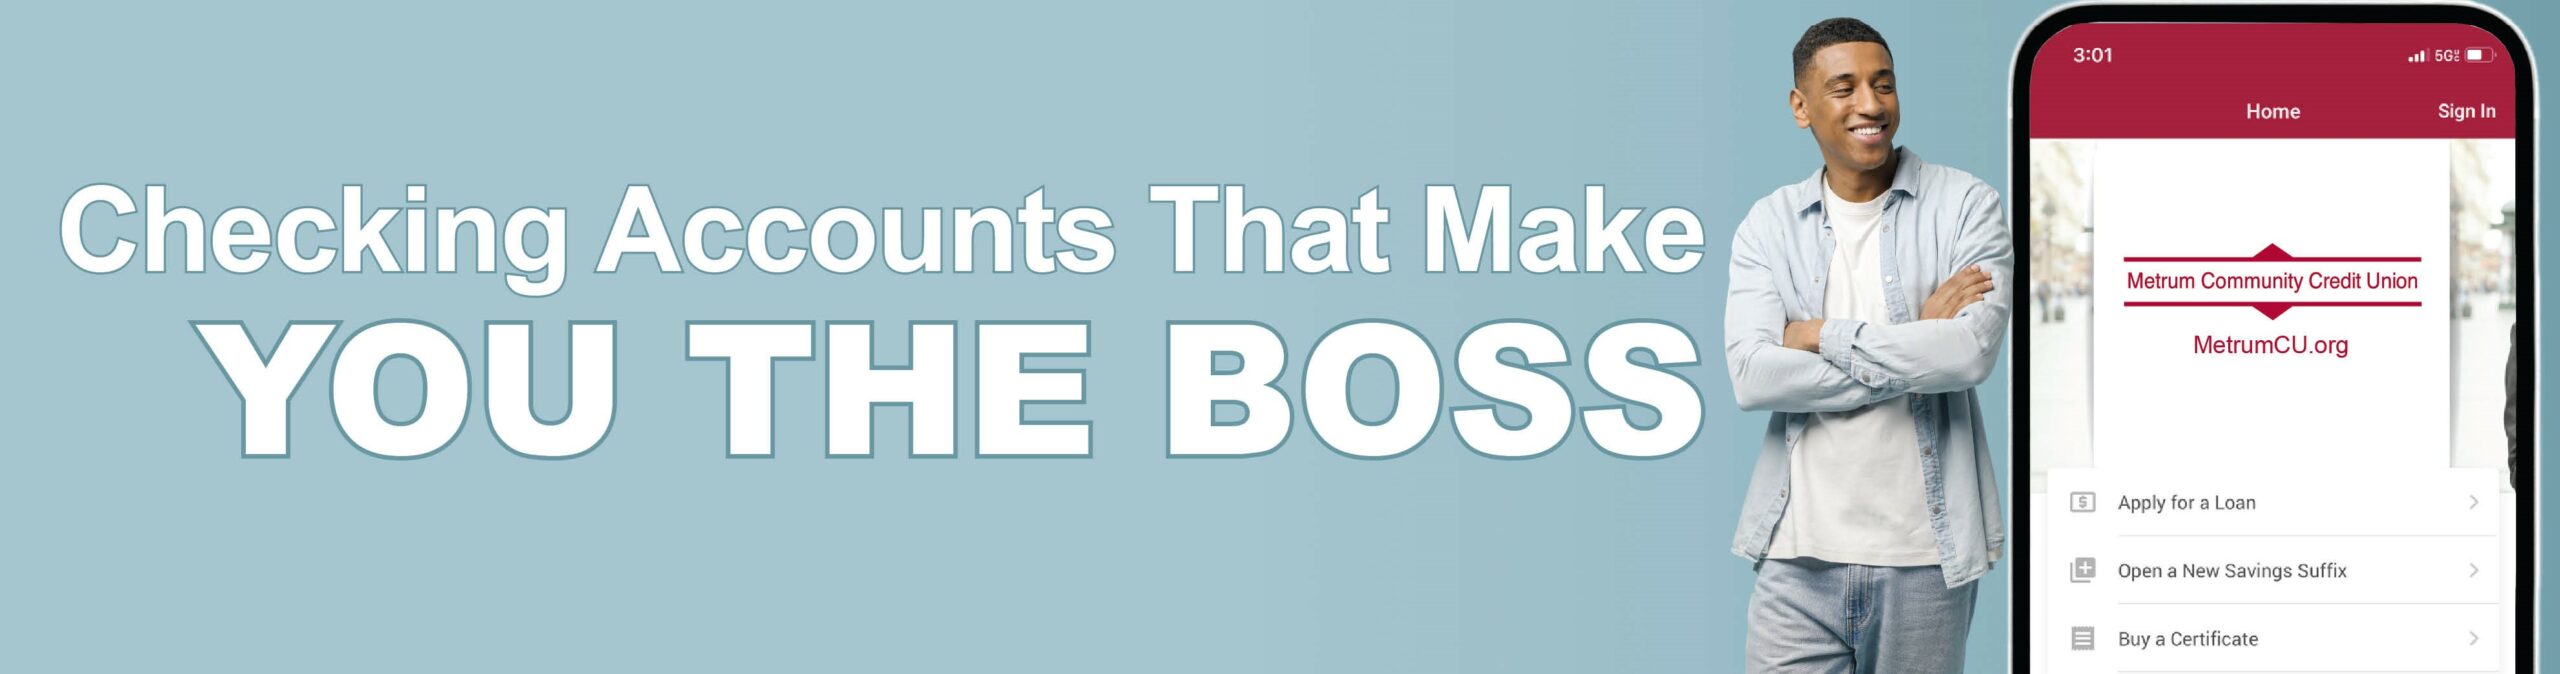 Checking Accounts that make you the boss